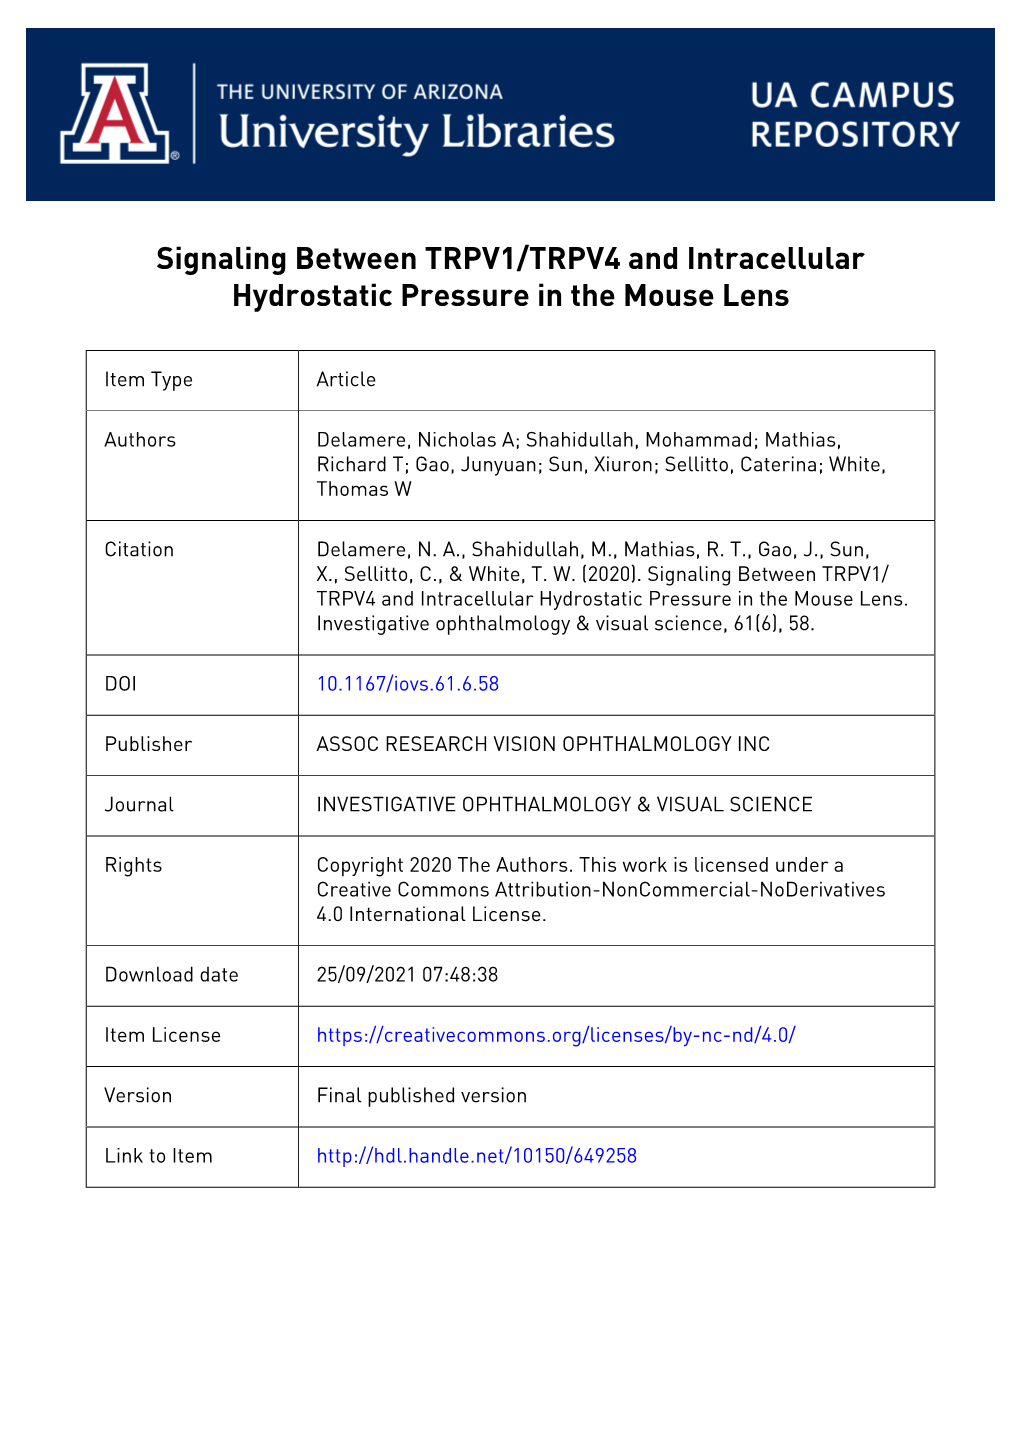 Signaling Between TRPV1/TRPV4 and Intracellular Hydrostatic Pressure in the Mouse Lens